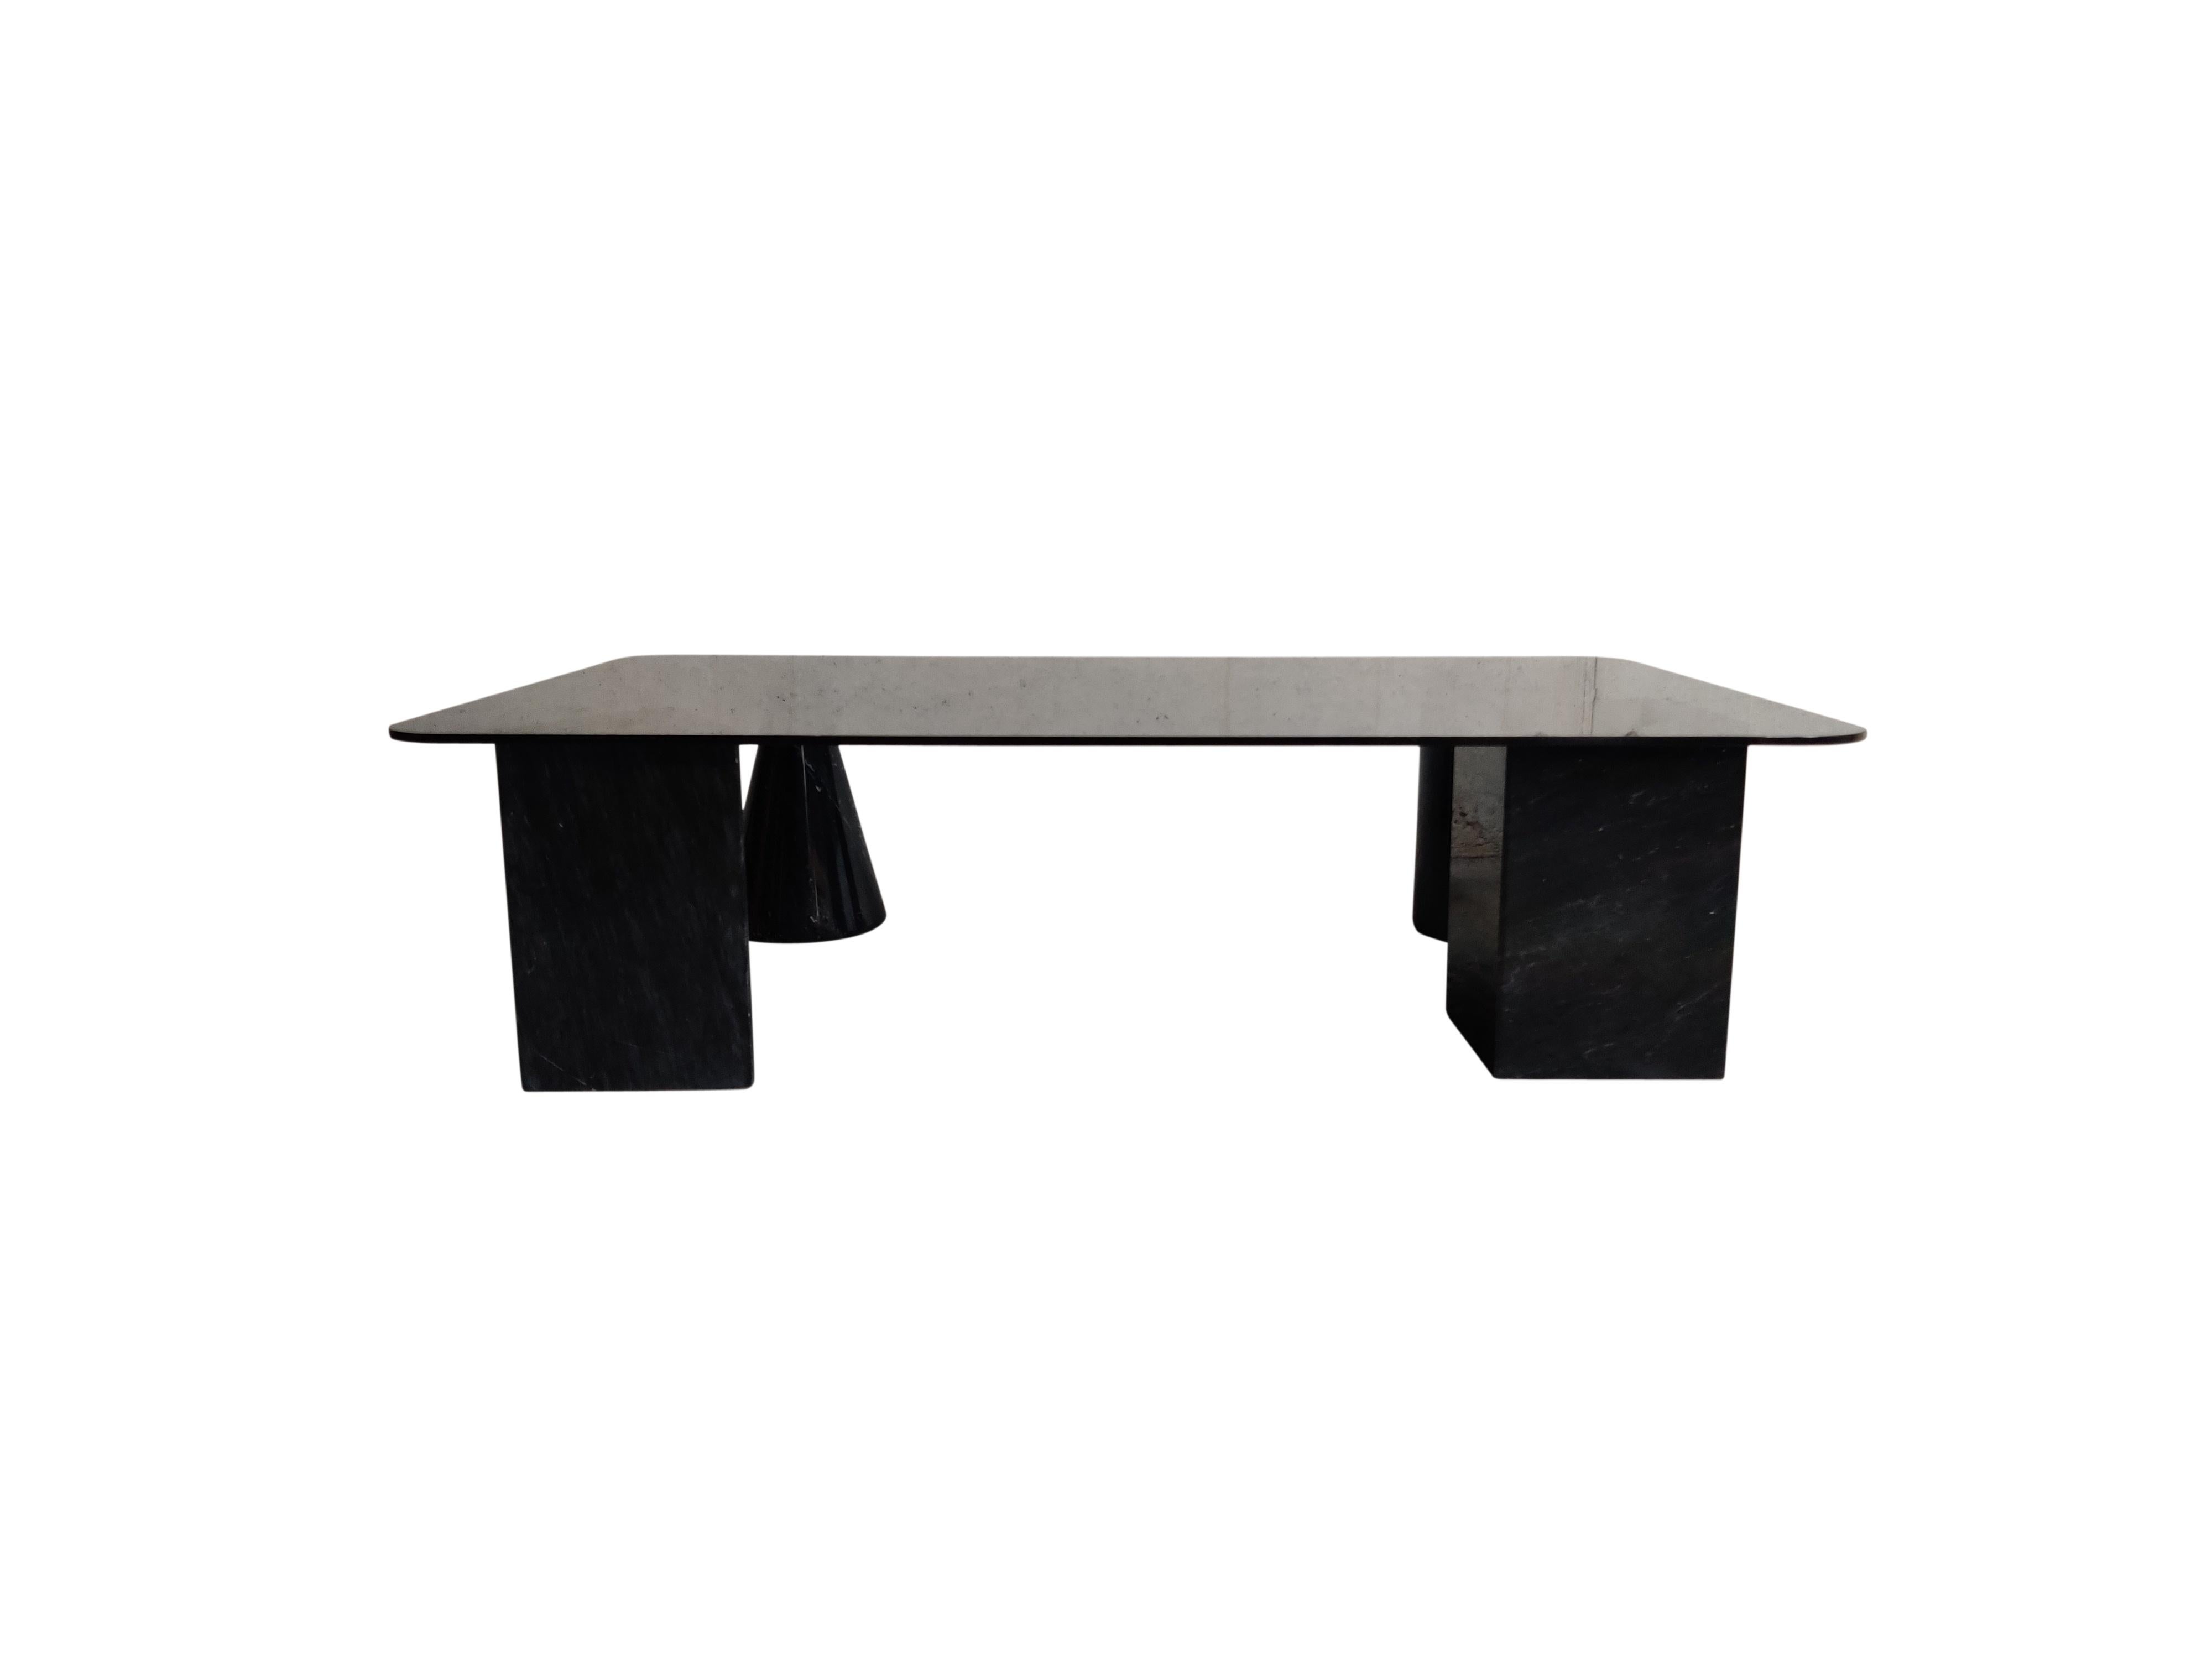 Coffee Table with smoked glass and geometric solid marble shapes in the style of ‘Metafora’ by Lella and Massimo Vignelli.

Beautiful vained marble.

Timeless design.

Very good condition.

1970s - Italy

Dimensions:
Height